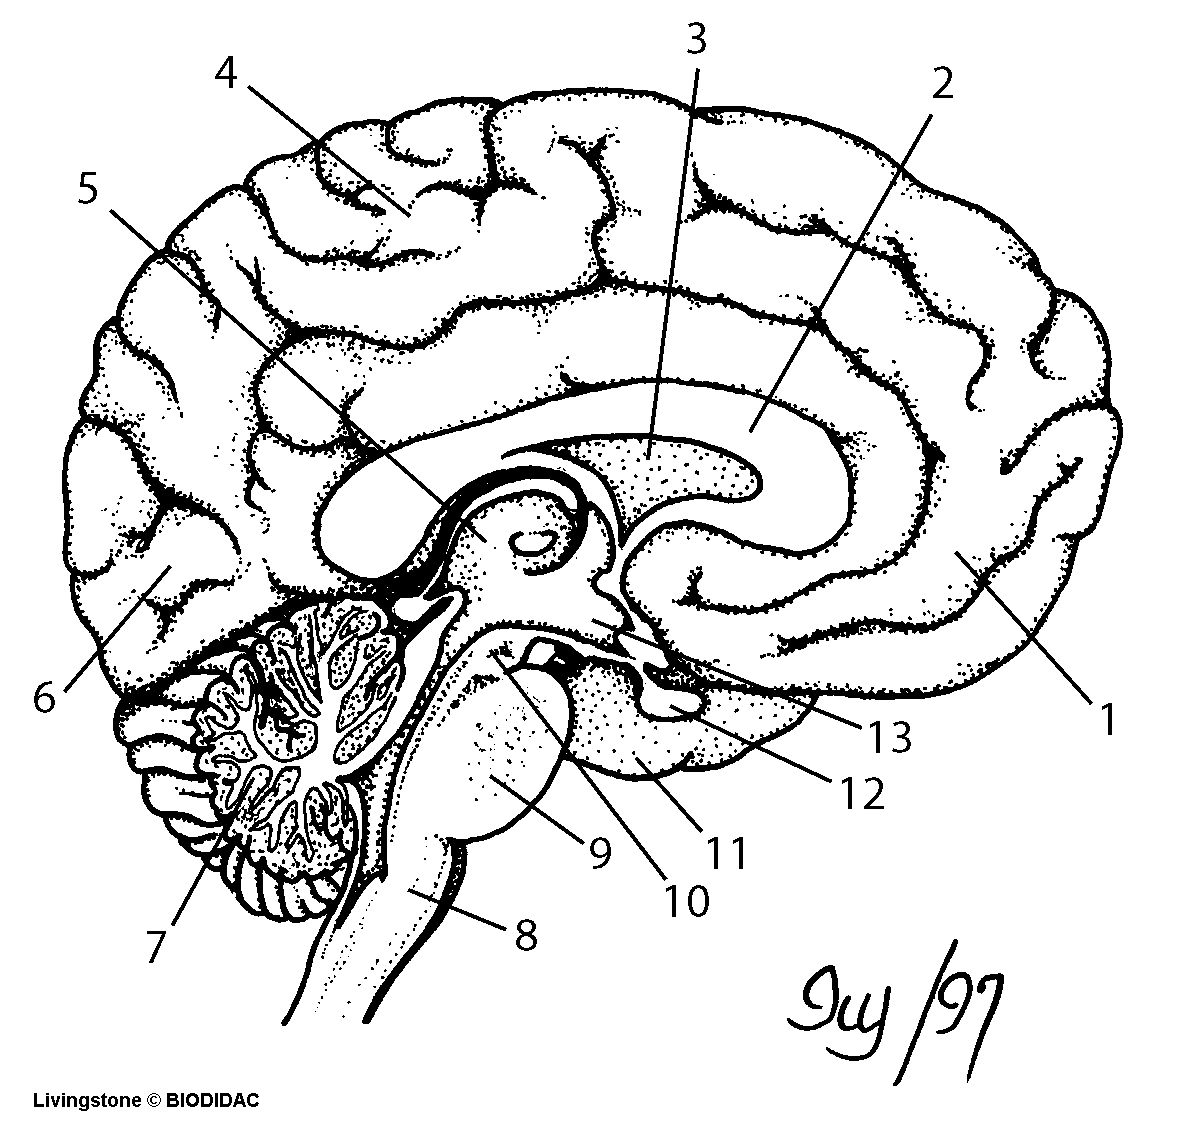 Central Nervous System Coloring Pages Brain Drawing With Labels Free Download Best Brain Drawing With